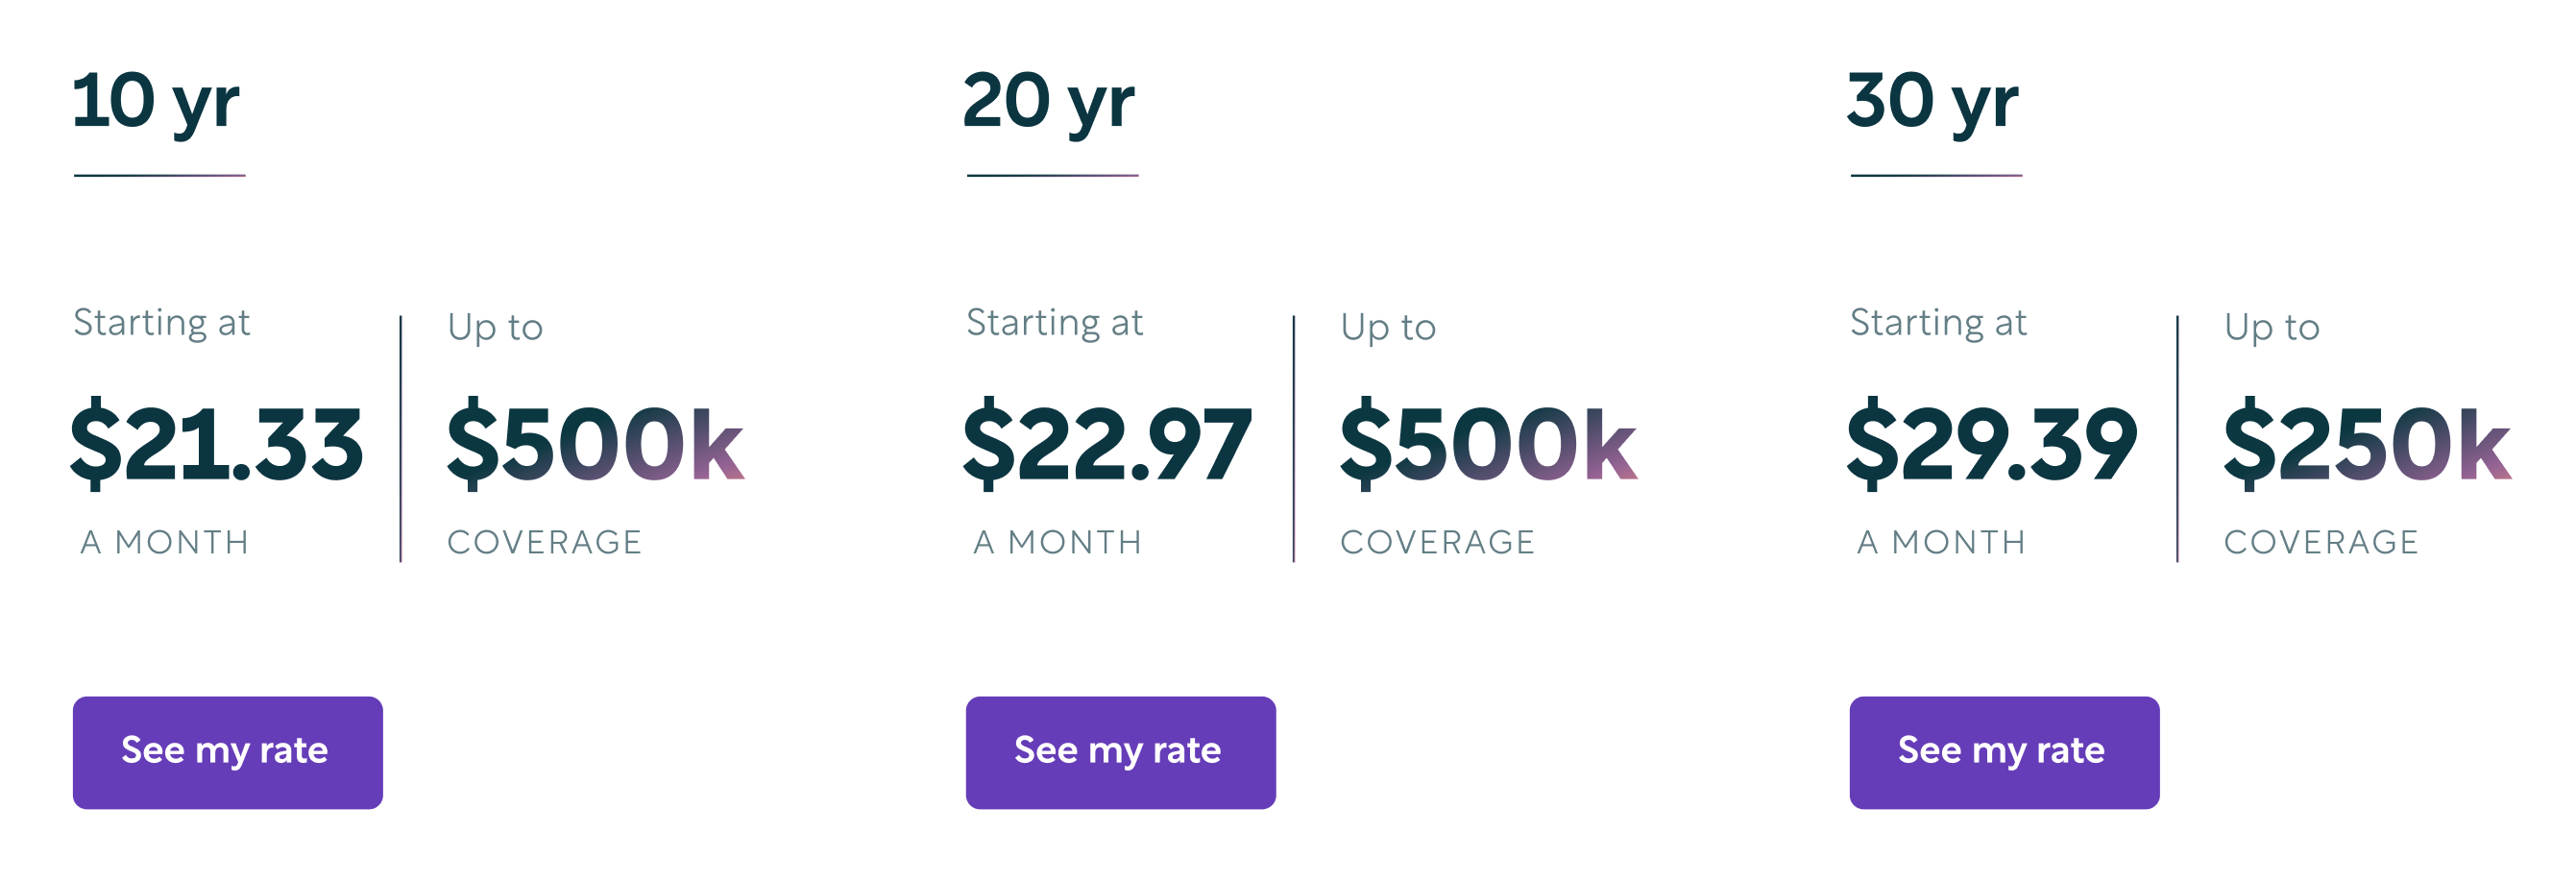 Bestow user interface components displaying insurance package offers